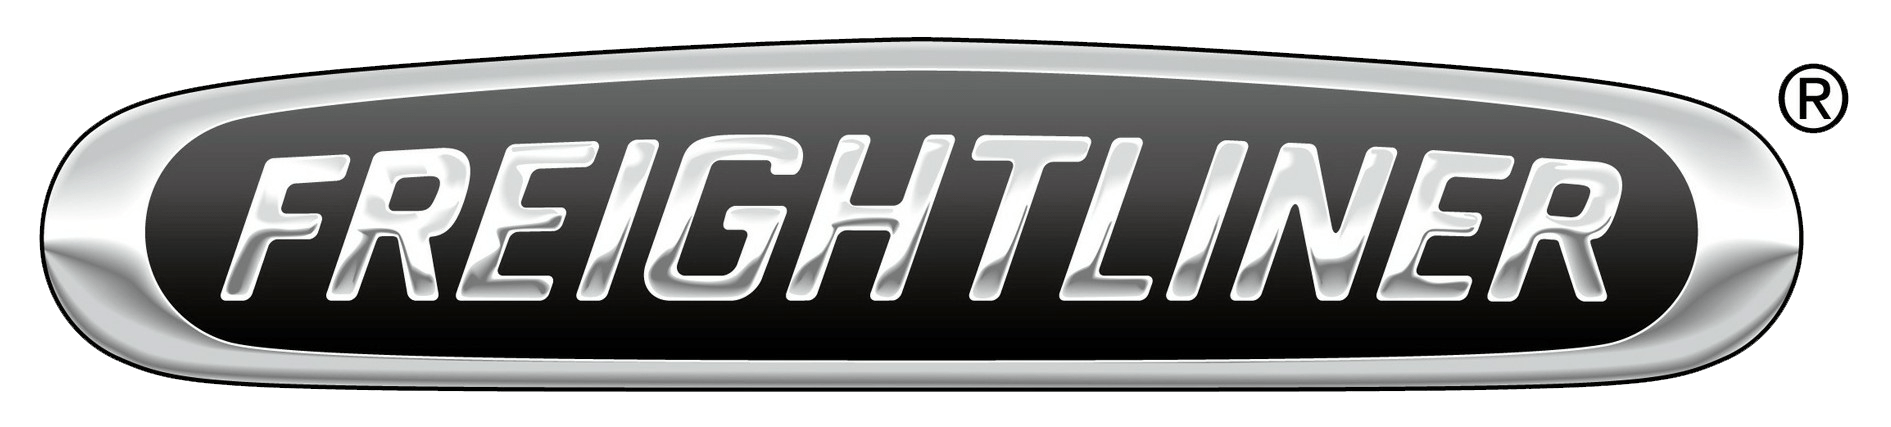 Daimler Freightliner Logo - Freightliner reviews, news, picture, and video